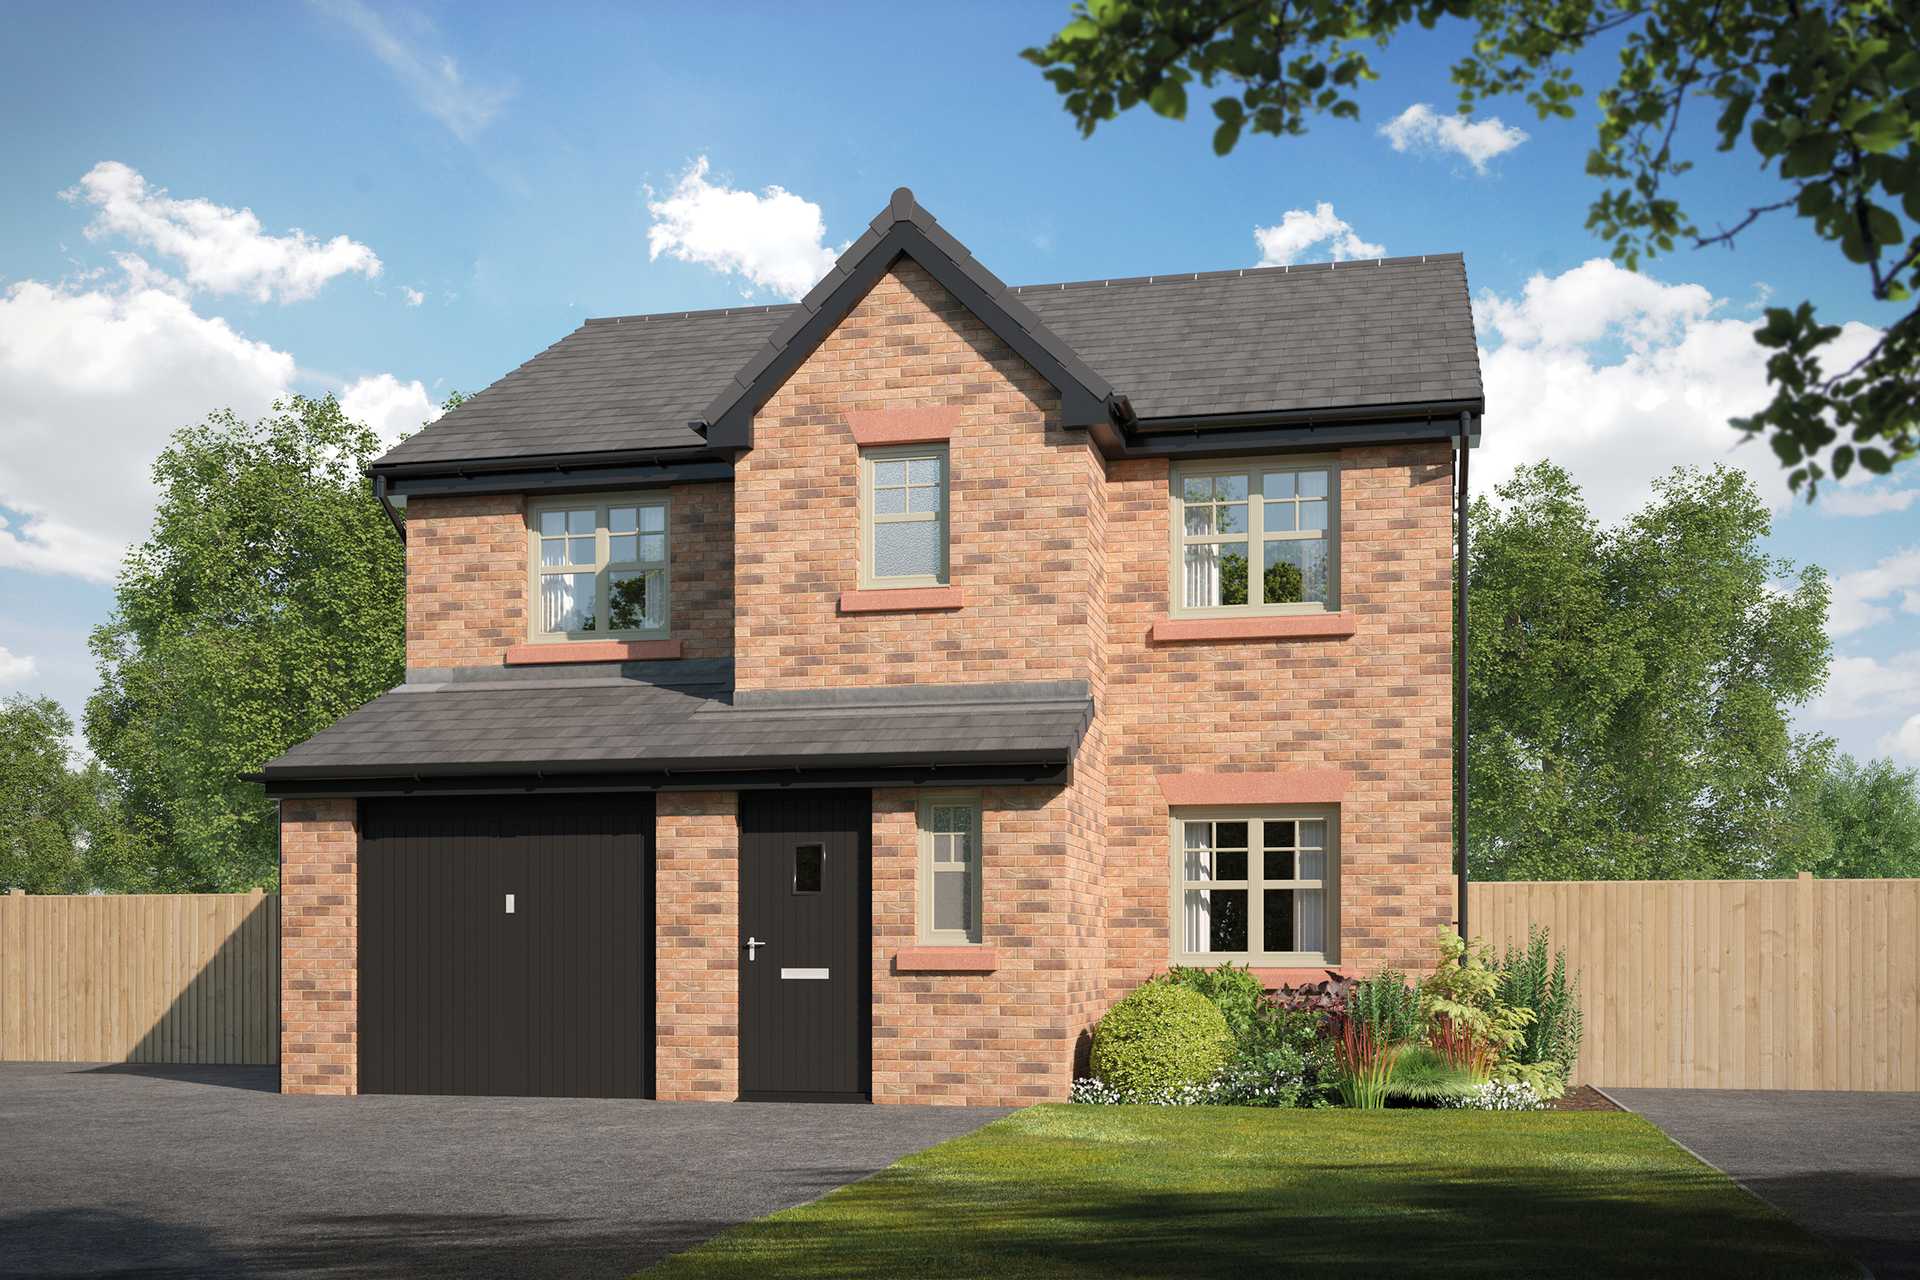 House in Macclesfield, Cheshire East 10207700